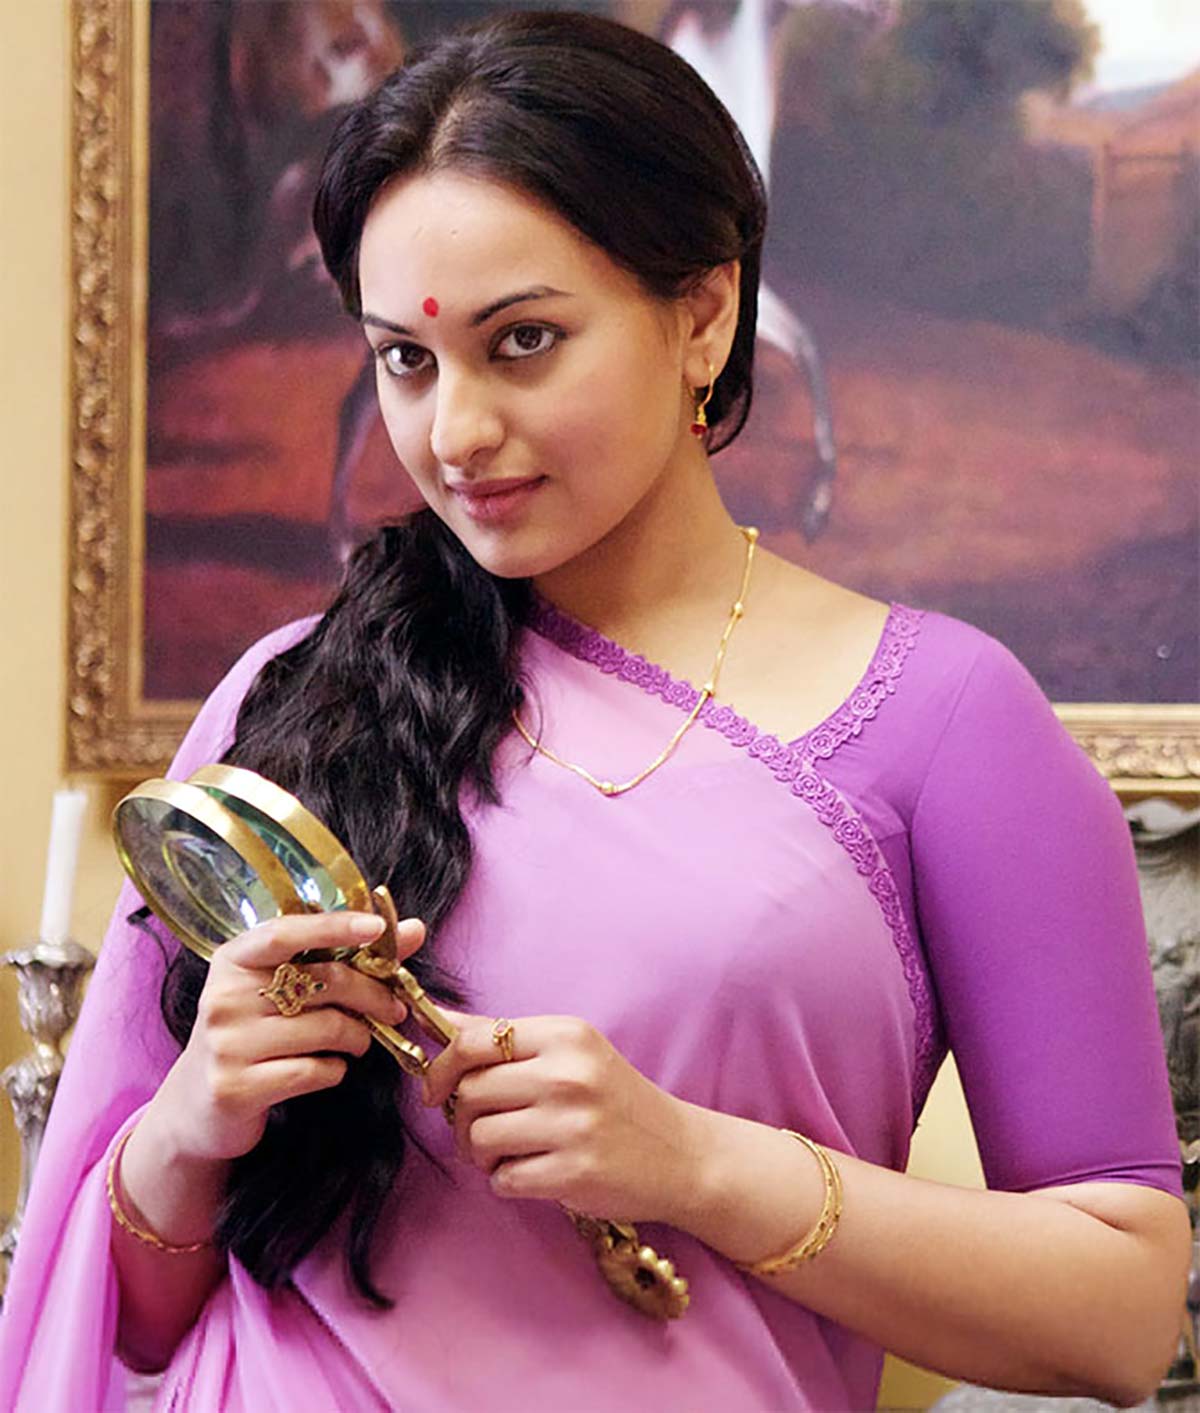 The BEST of Sonakshi Sinha - Rediff.com movies